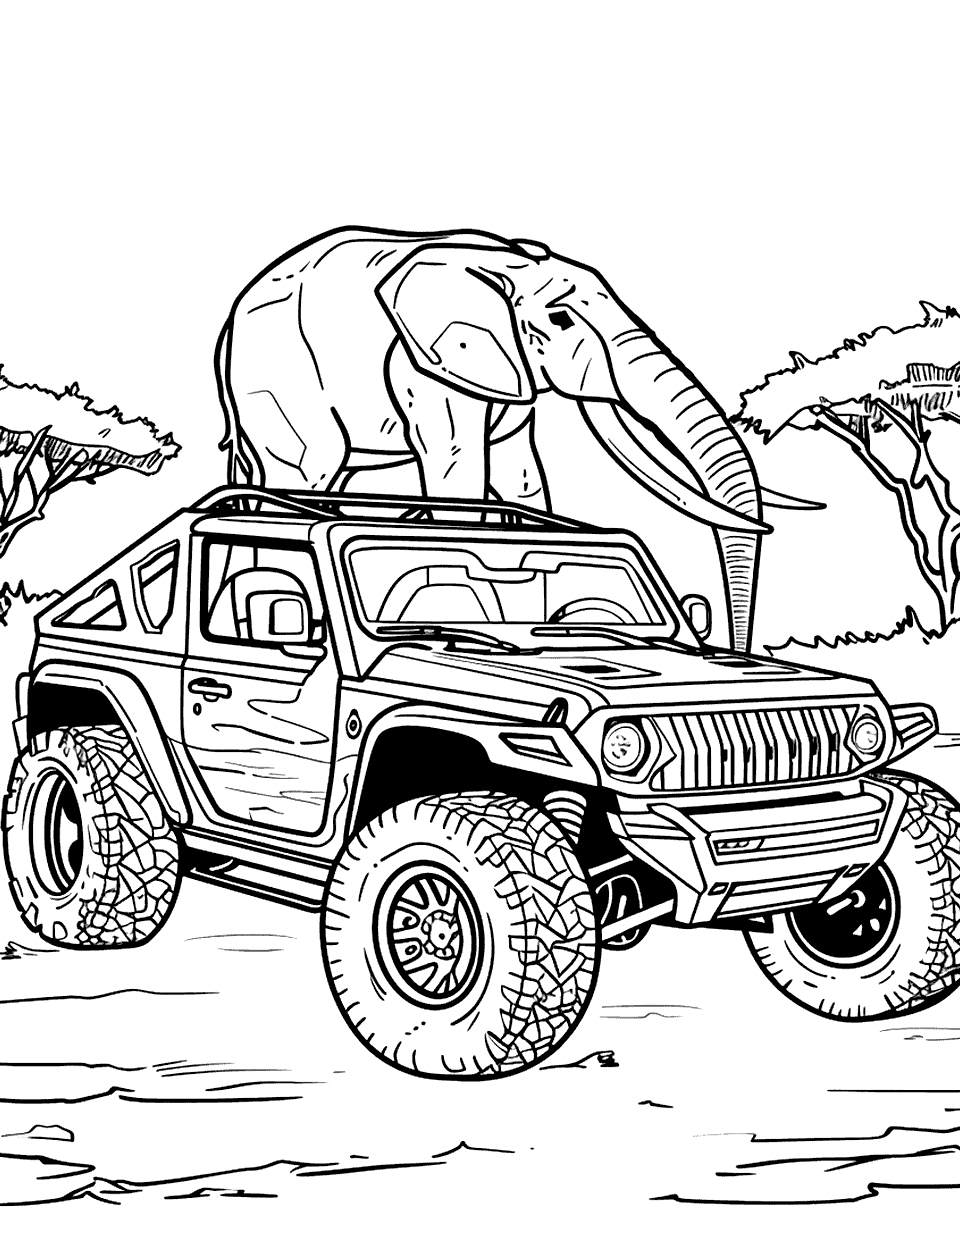 Safari Explorer Mission Coloring Page - A Hot Wheels car decked out in safari gear, with a single elephant in the background.